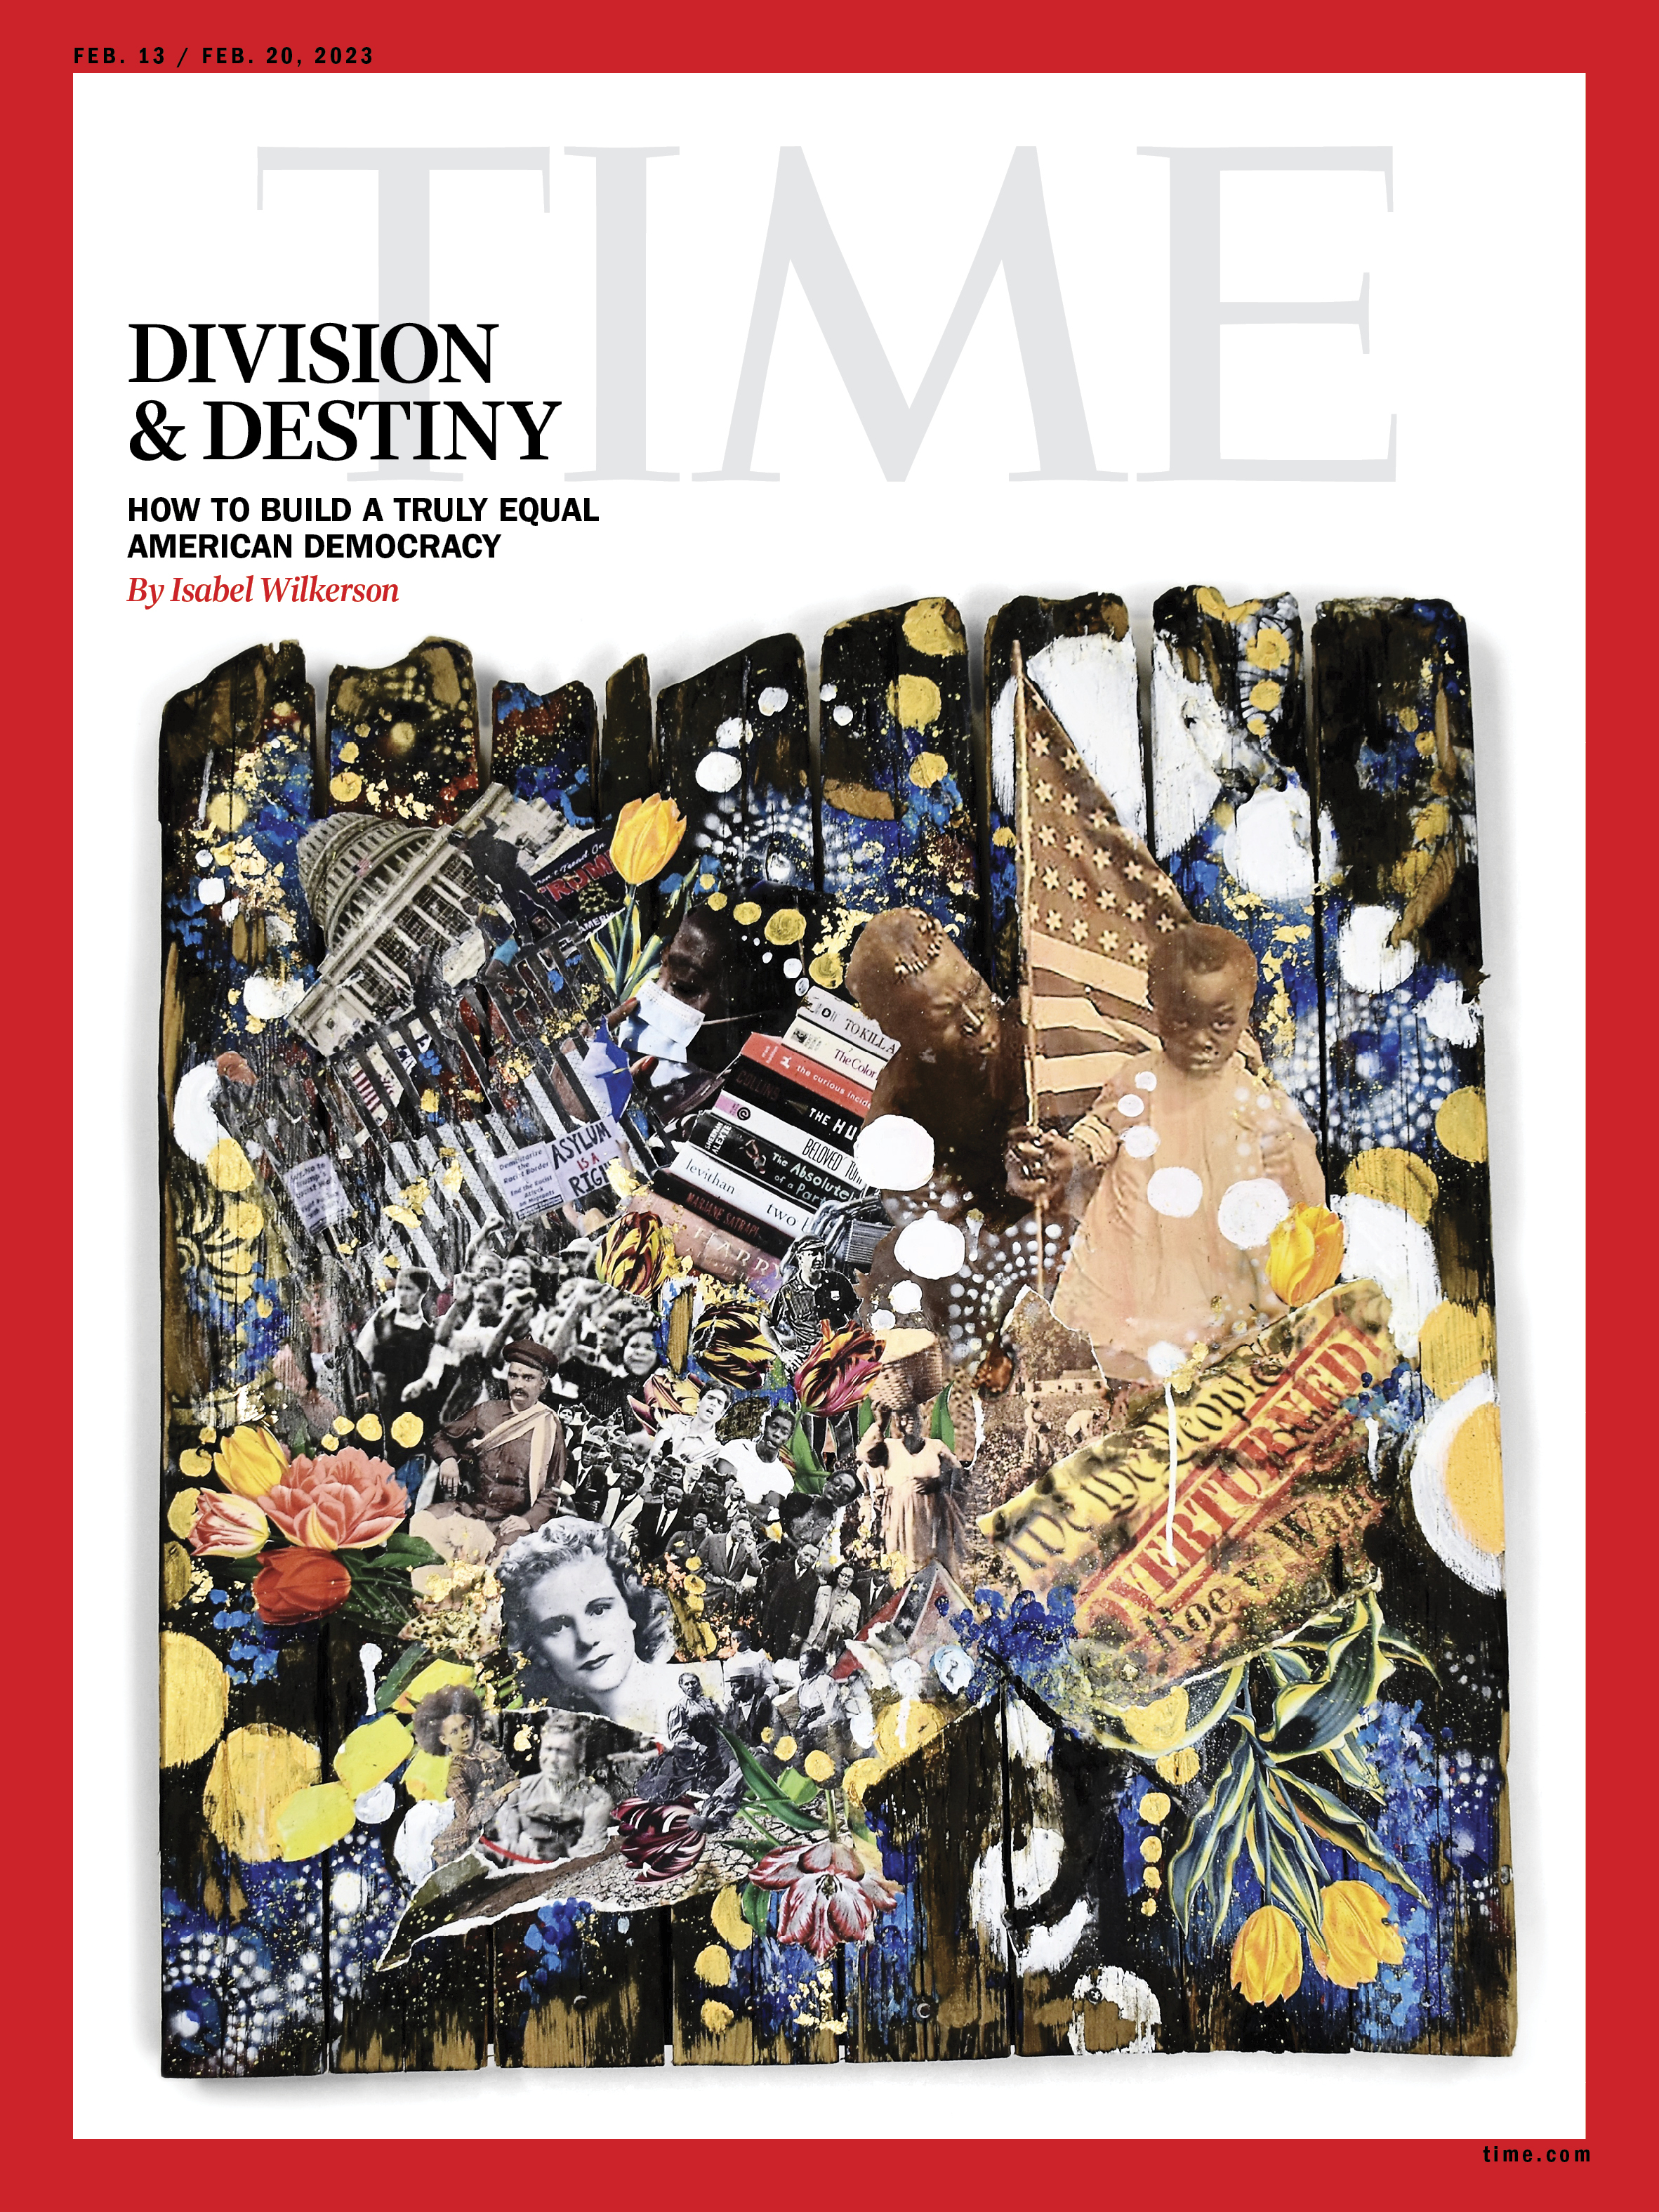 The Story Behind TIME’s ‘Division & Destiny’ Cover